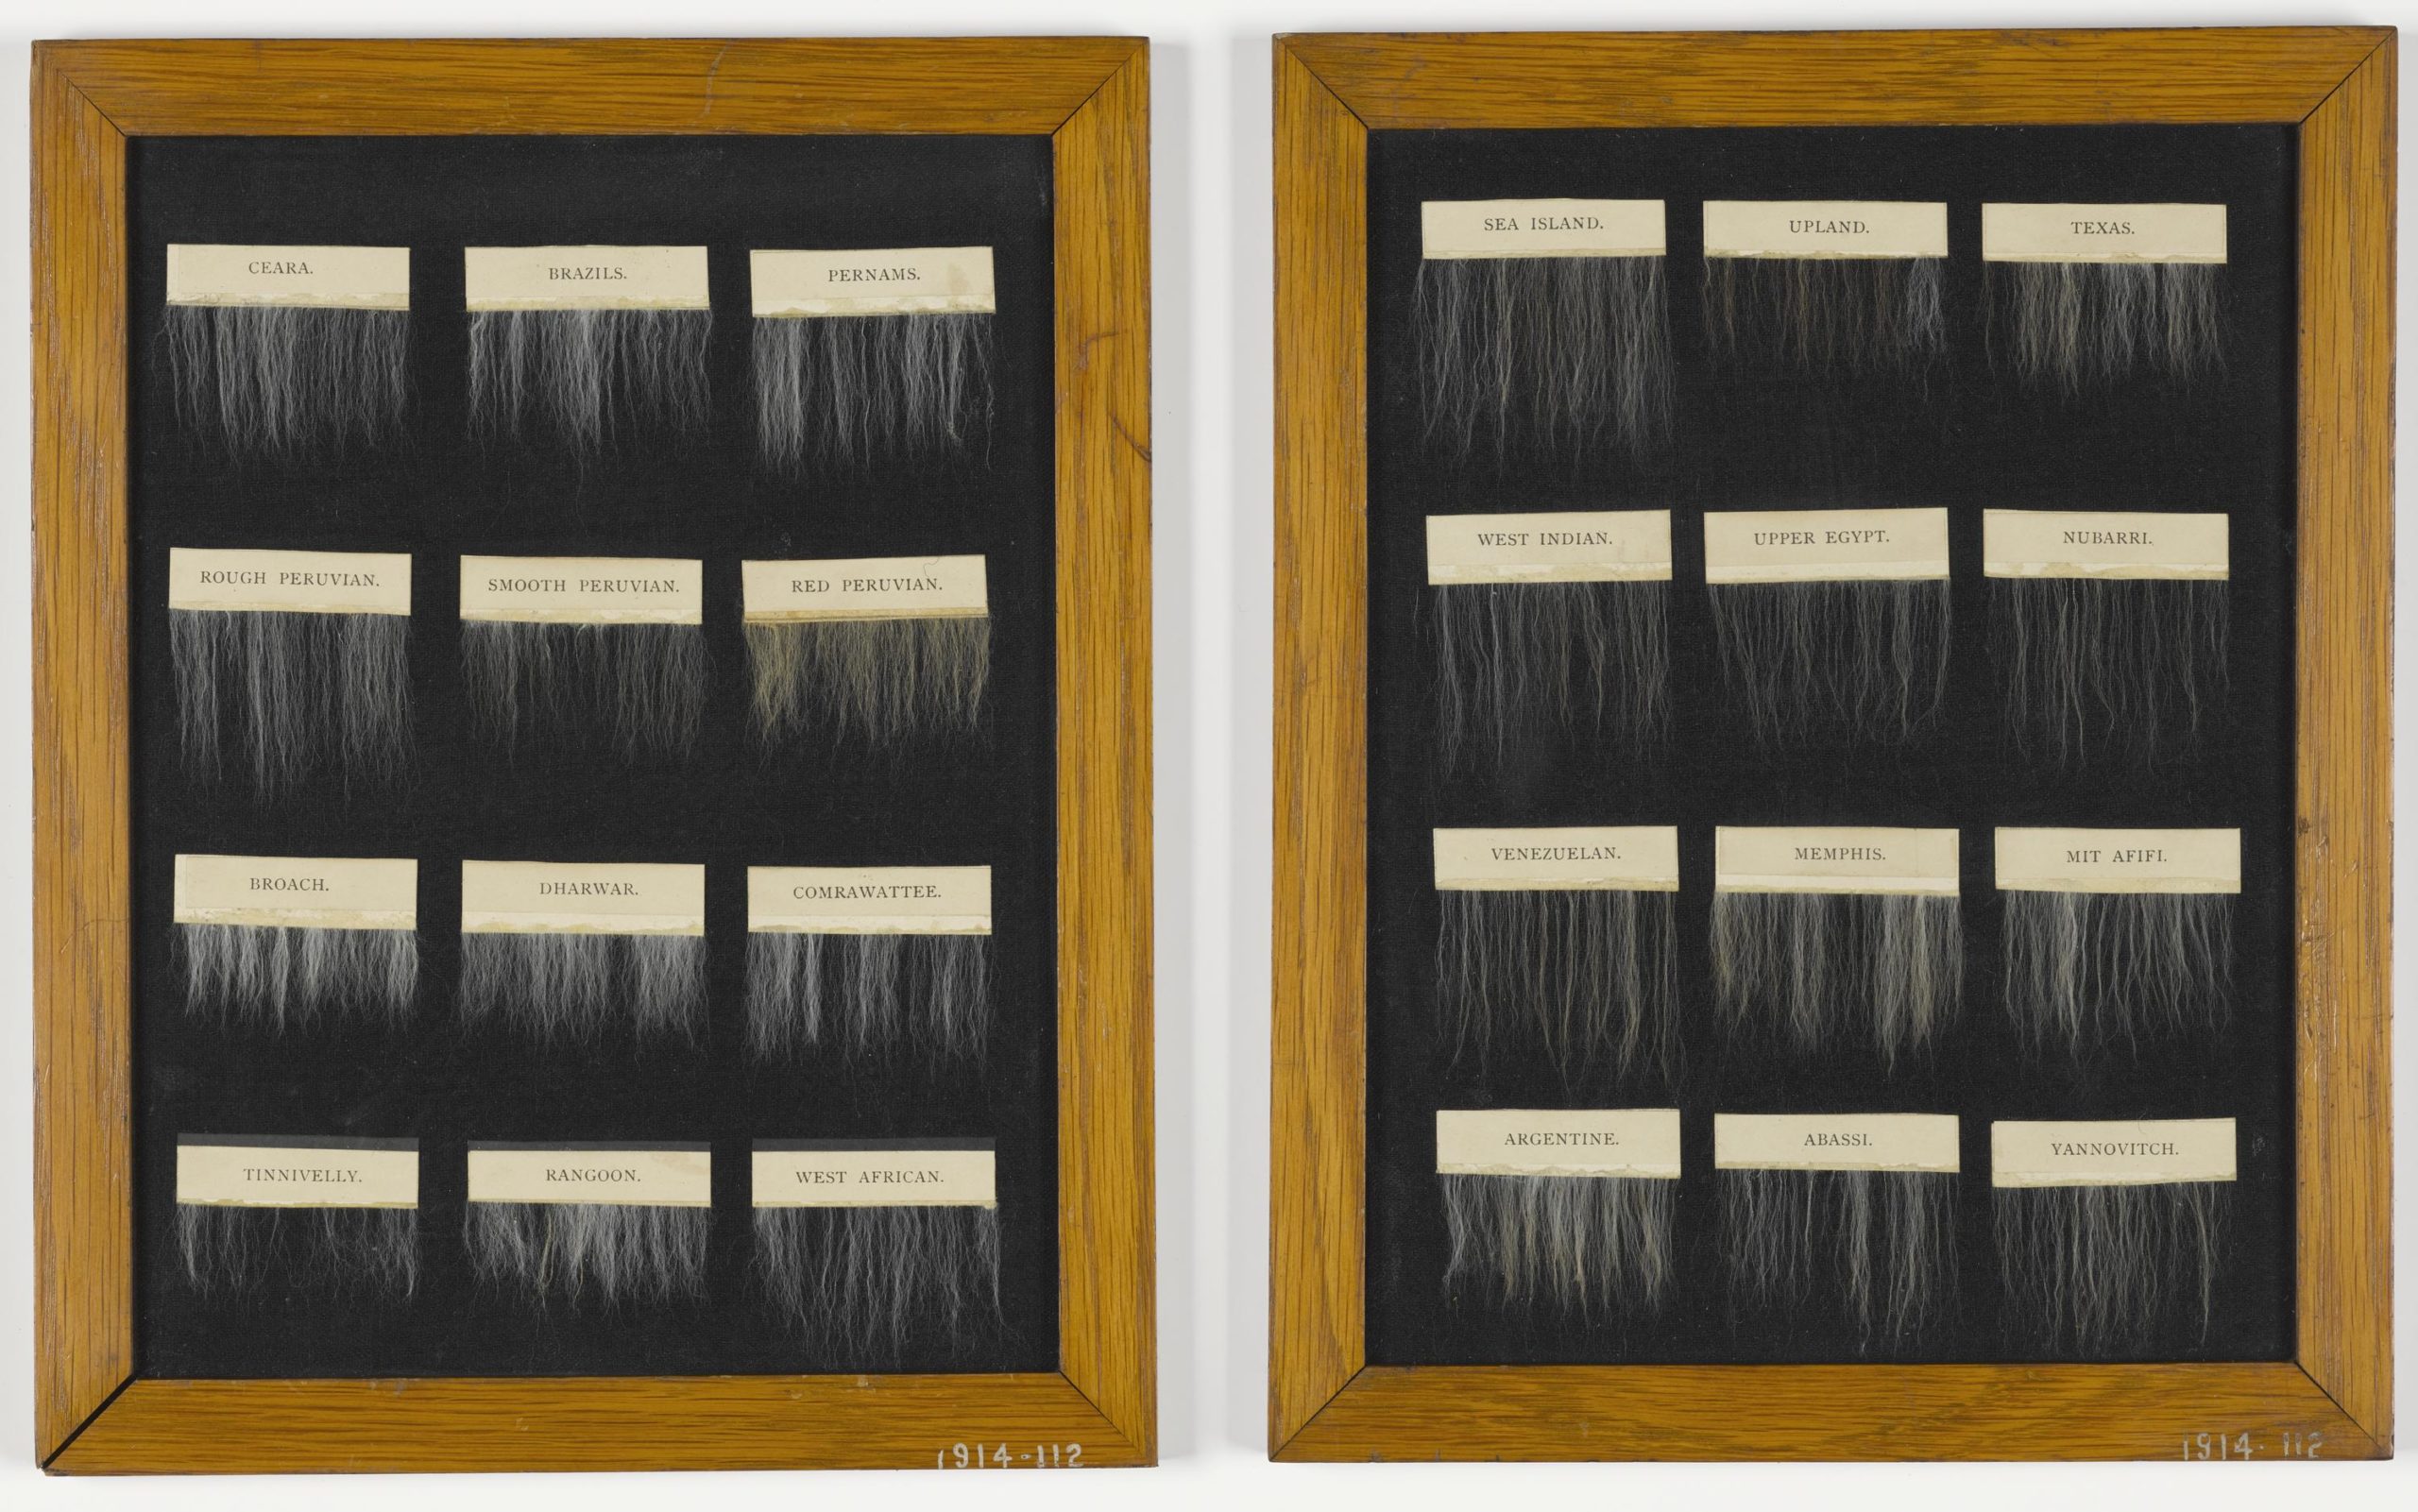 Two wooden frames containing a total of 24 cotton samples from different locations